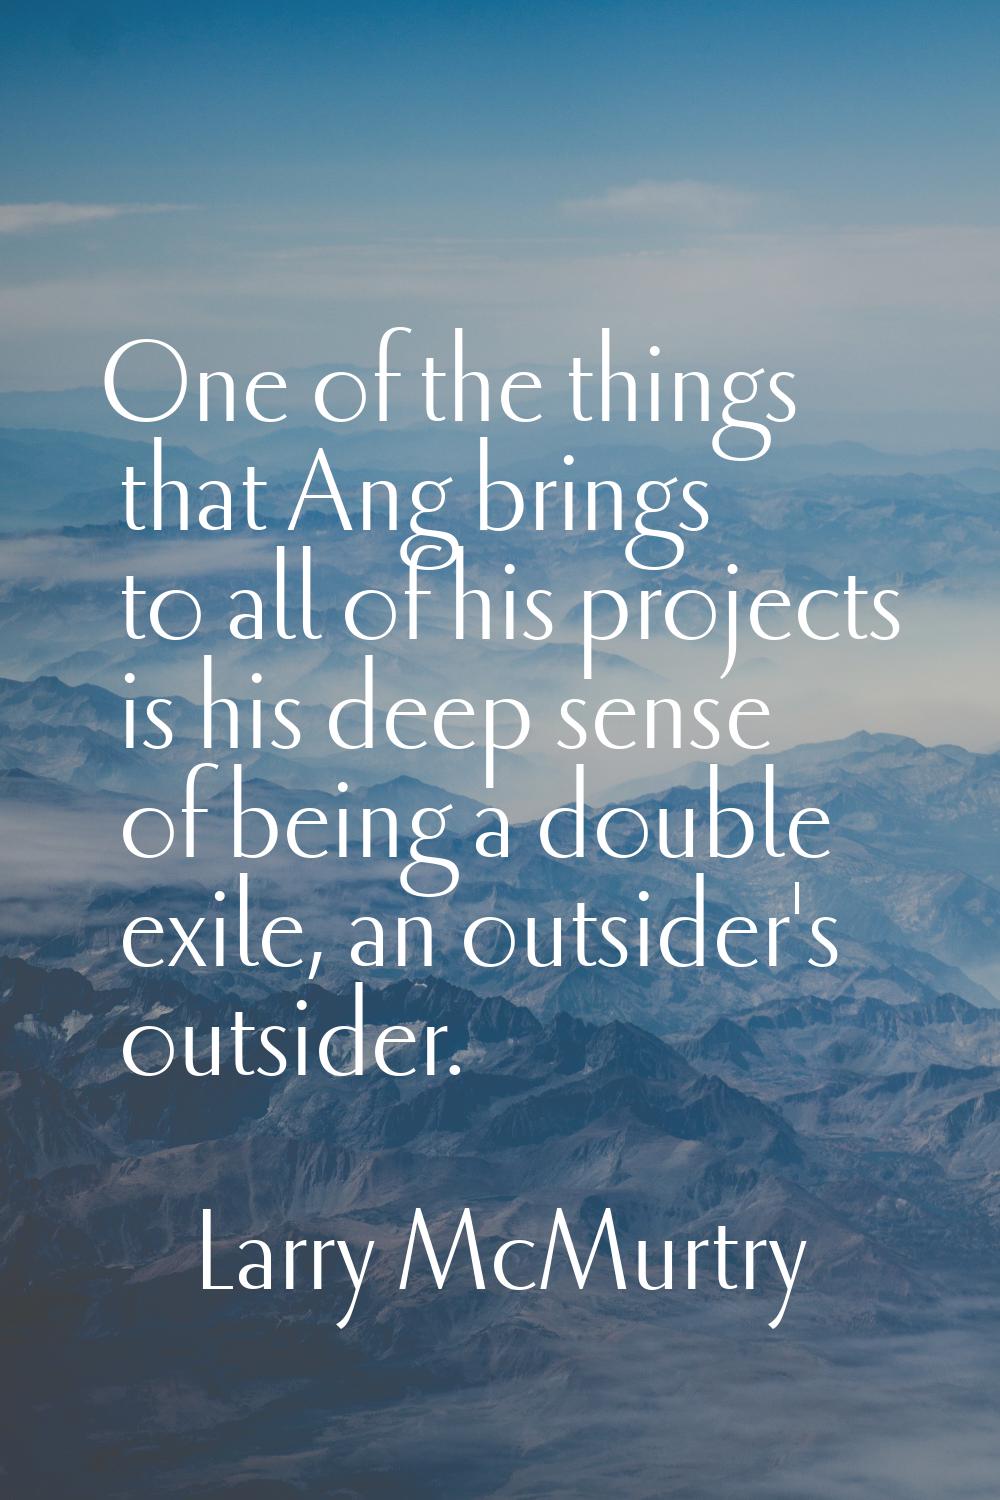 One of the things that Ang brings to all of his projects is his deep sense of being a double exile,